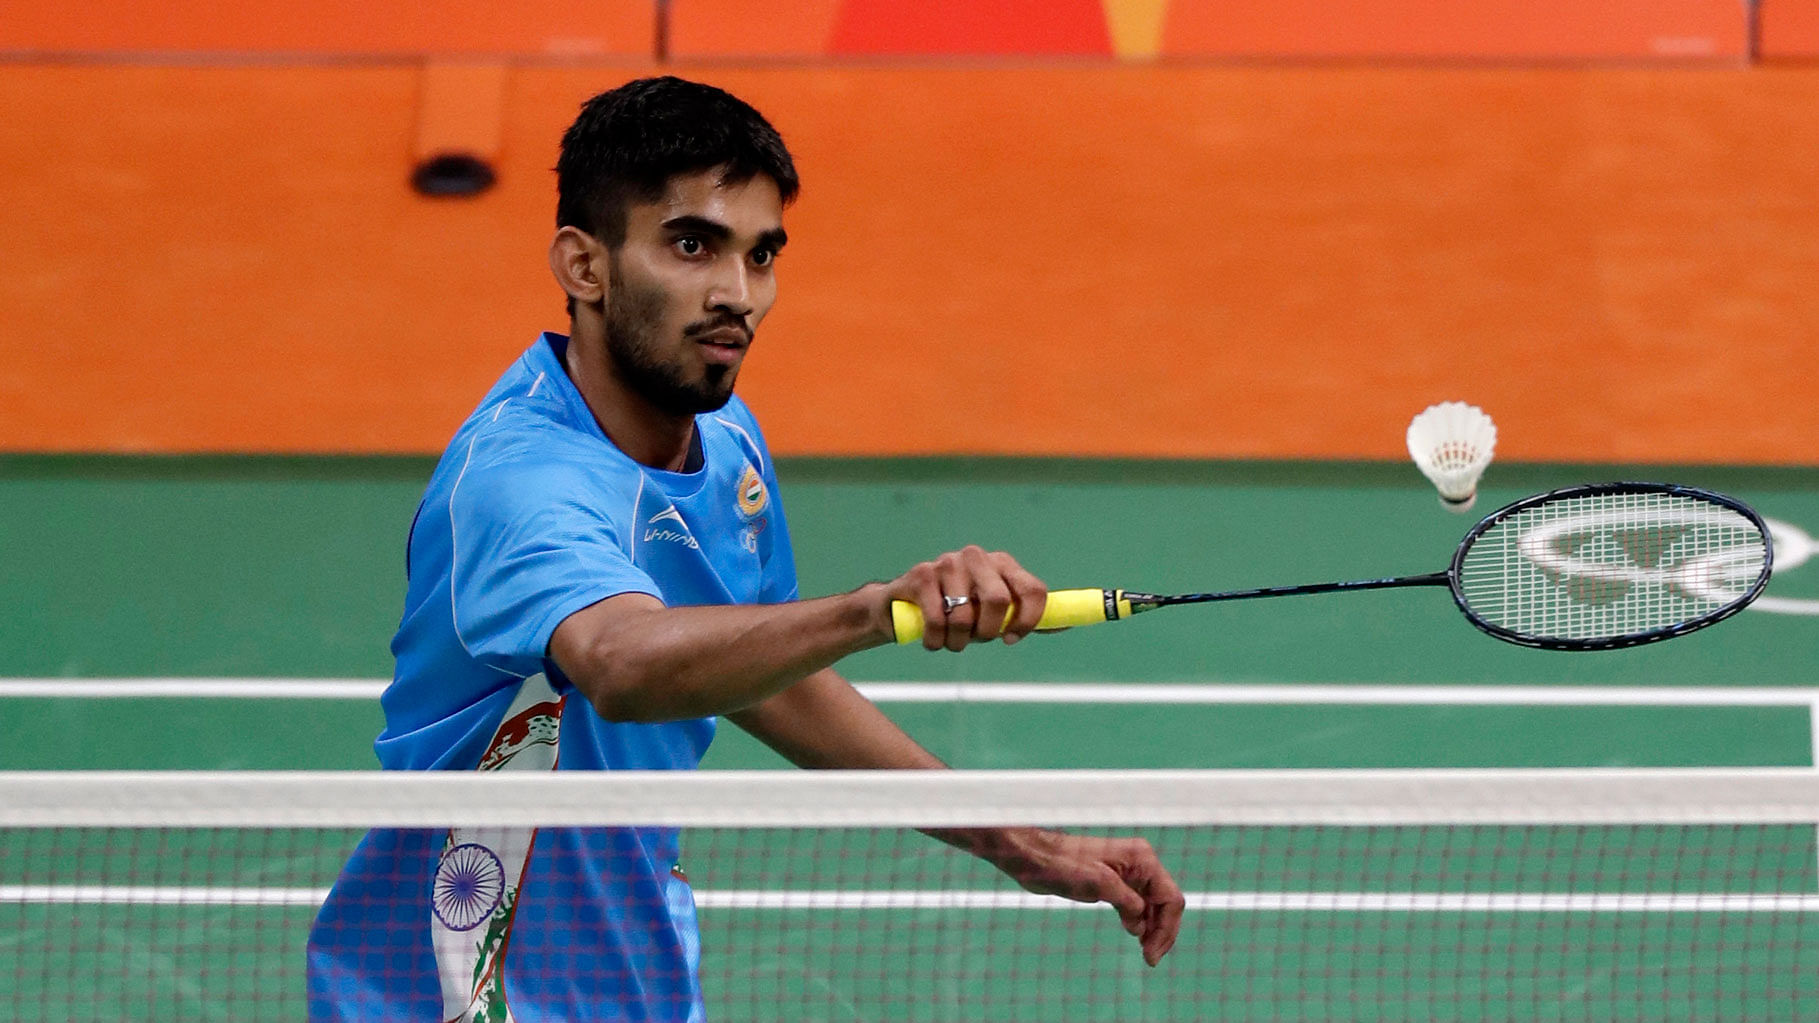 Kidambi Srikanth, along with Parupalli Kashyap, is the only Indian male to have reached the quarterfinals of the Rio Olympics (Photo: AP)